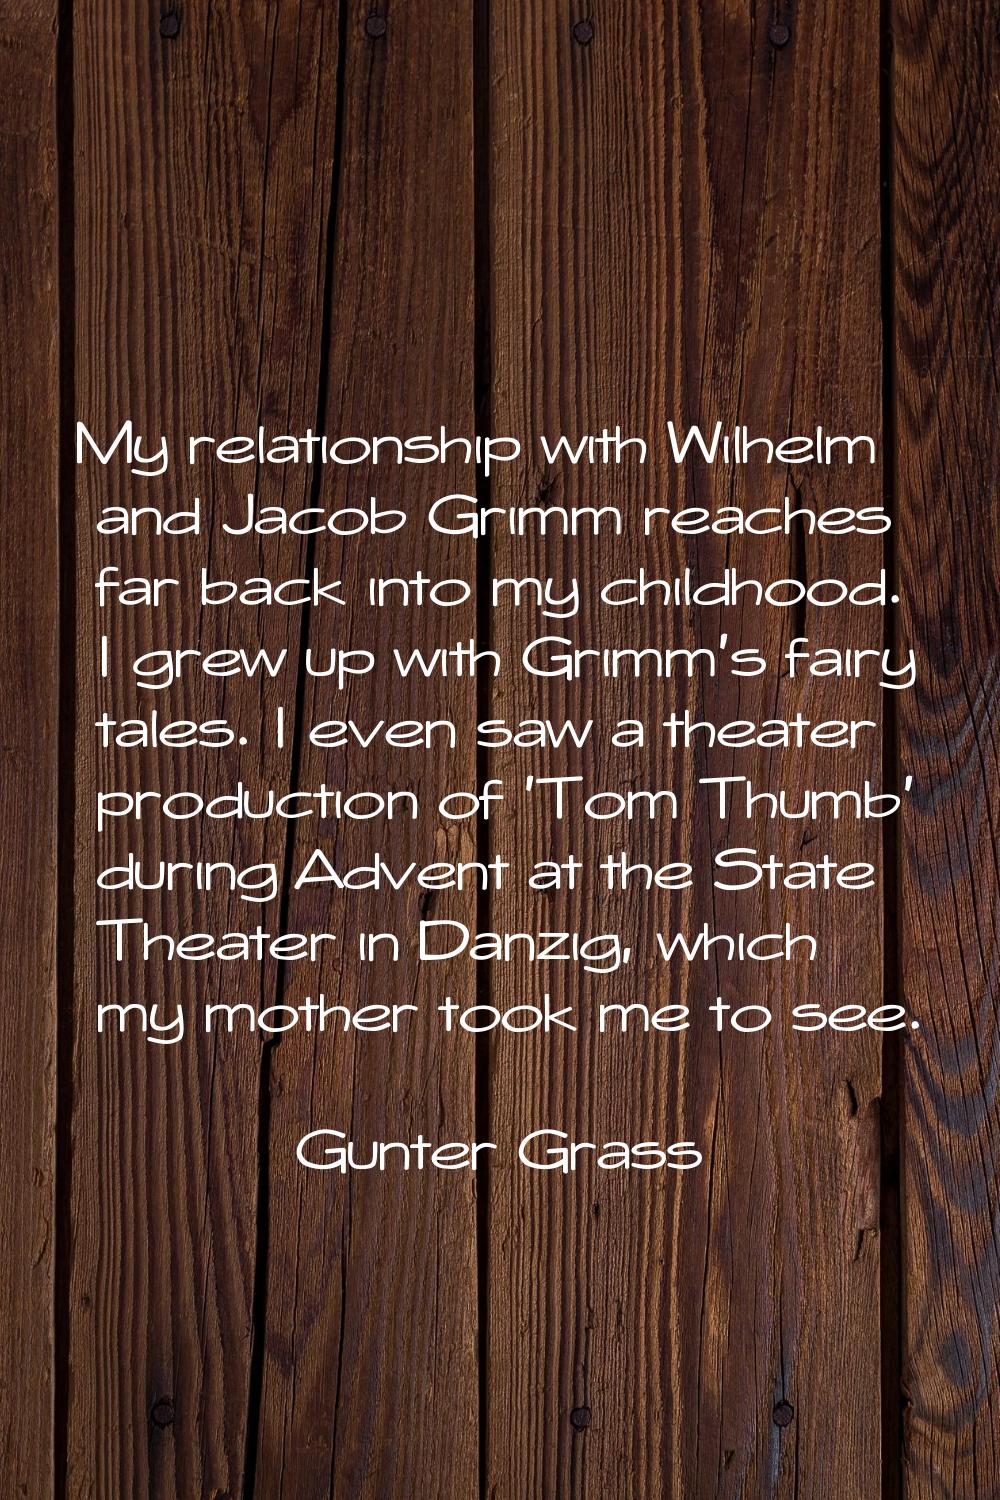 My relationship with Wilhelm and Jacob Grimm reaches far back into my childhood. I grew up with Gri